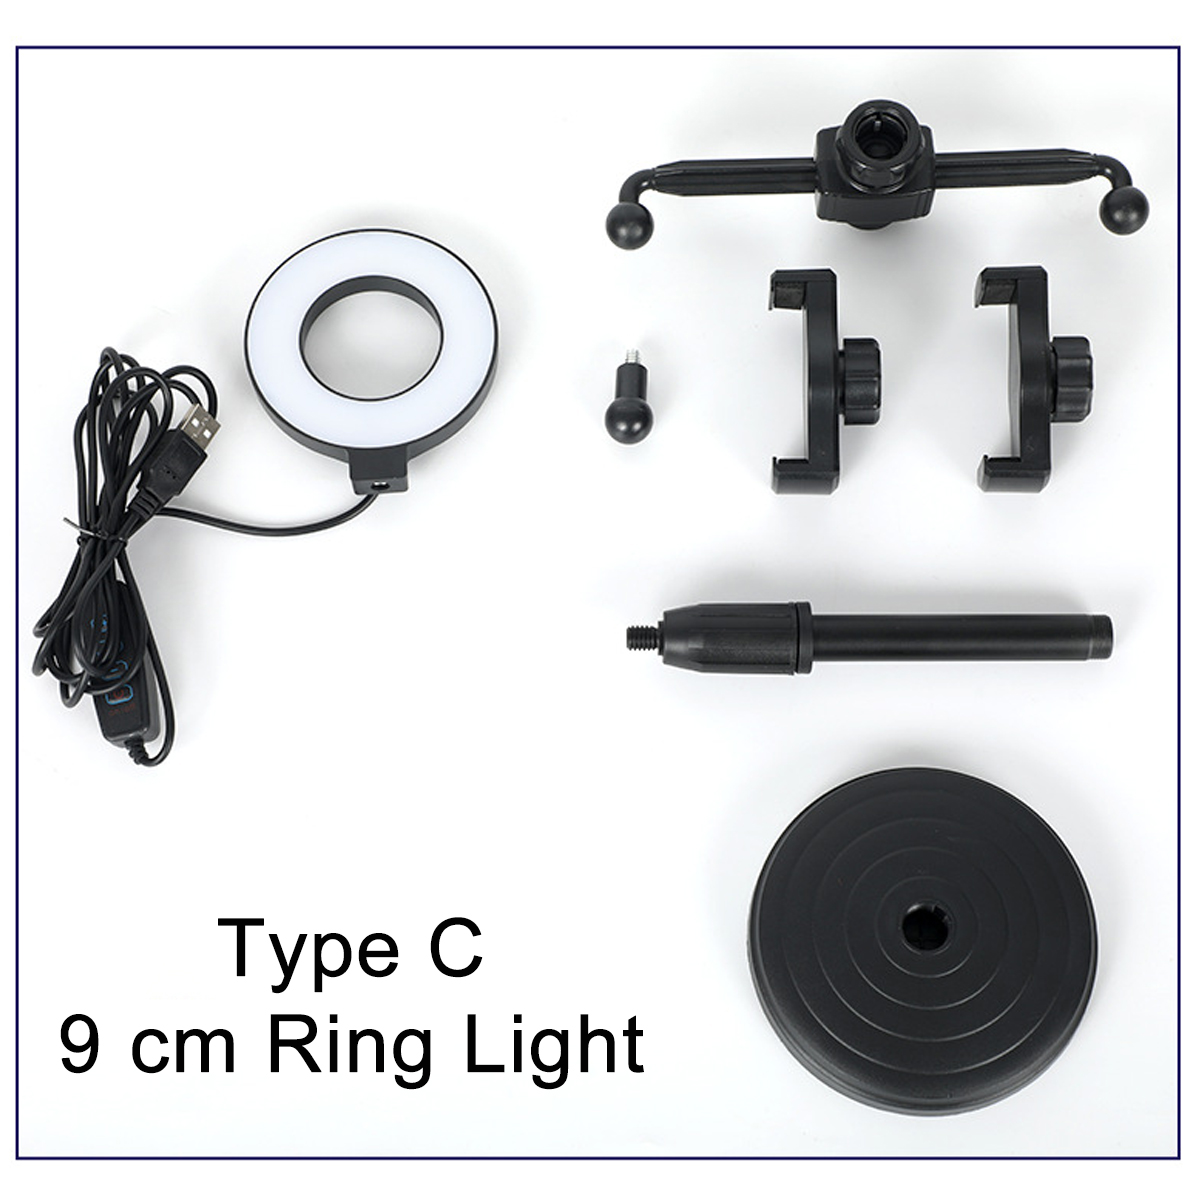 916-cm-3-Modes-of-Color-Temperature-Color-Ring-Fill-Light-with-Dual-Mobile-Phone-Holder-YouTube-Tikt-1881126-14